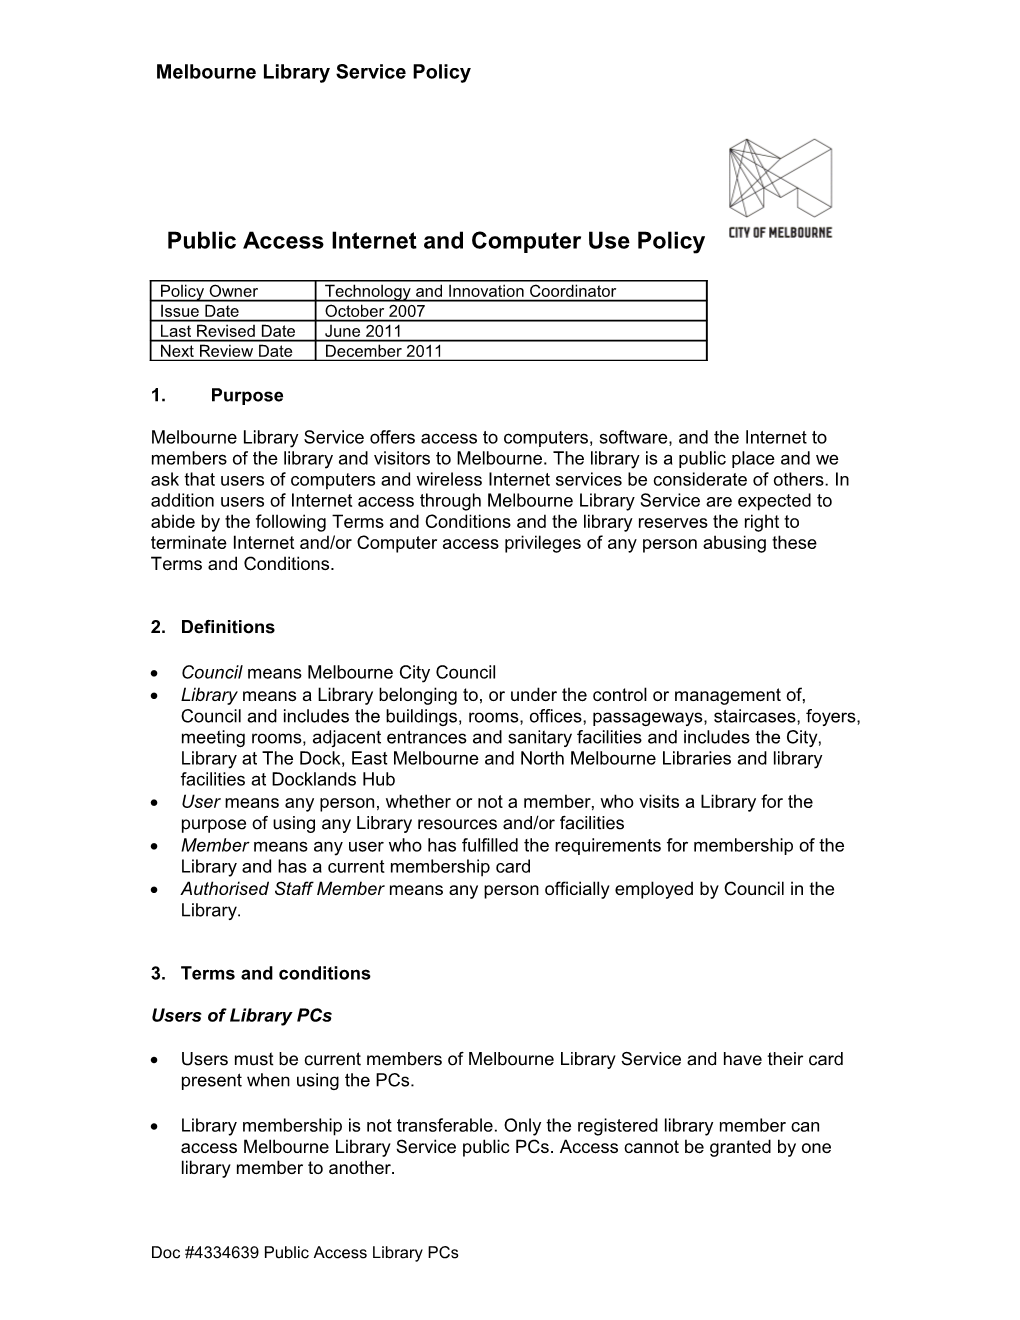 Melbourne Library Service - Public Access Internet and Computer Use Policy